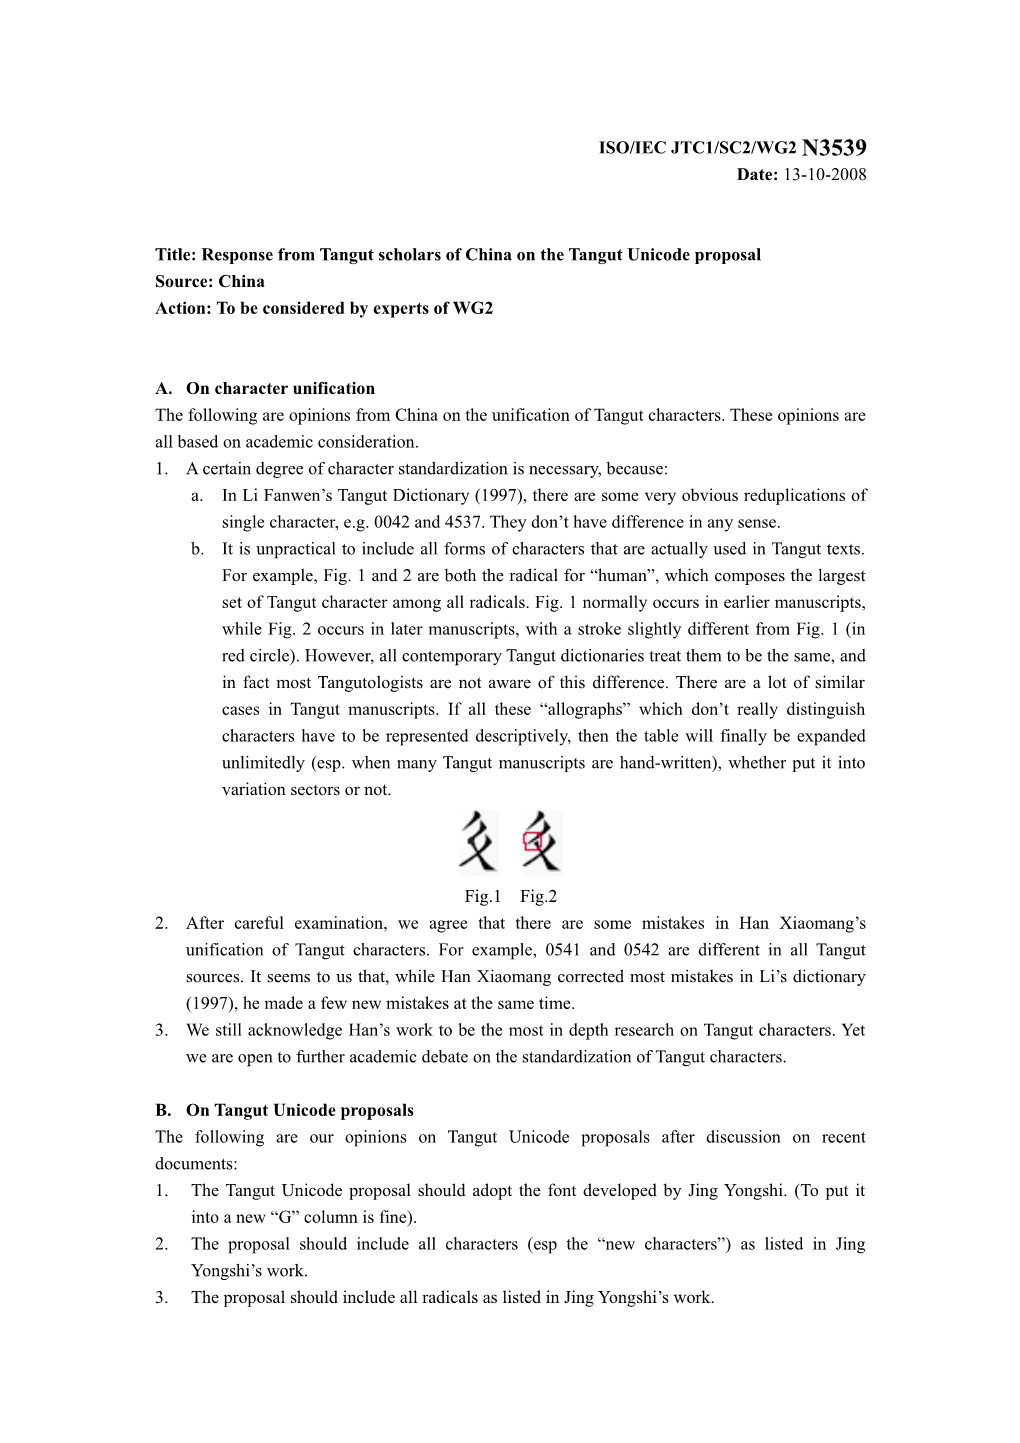 Response from Tangut Scholars of China on the Tangut Unicode Proposal